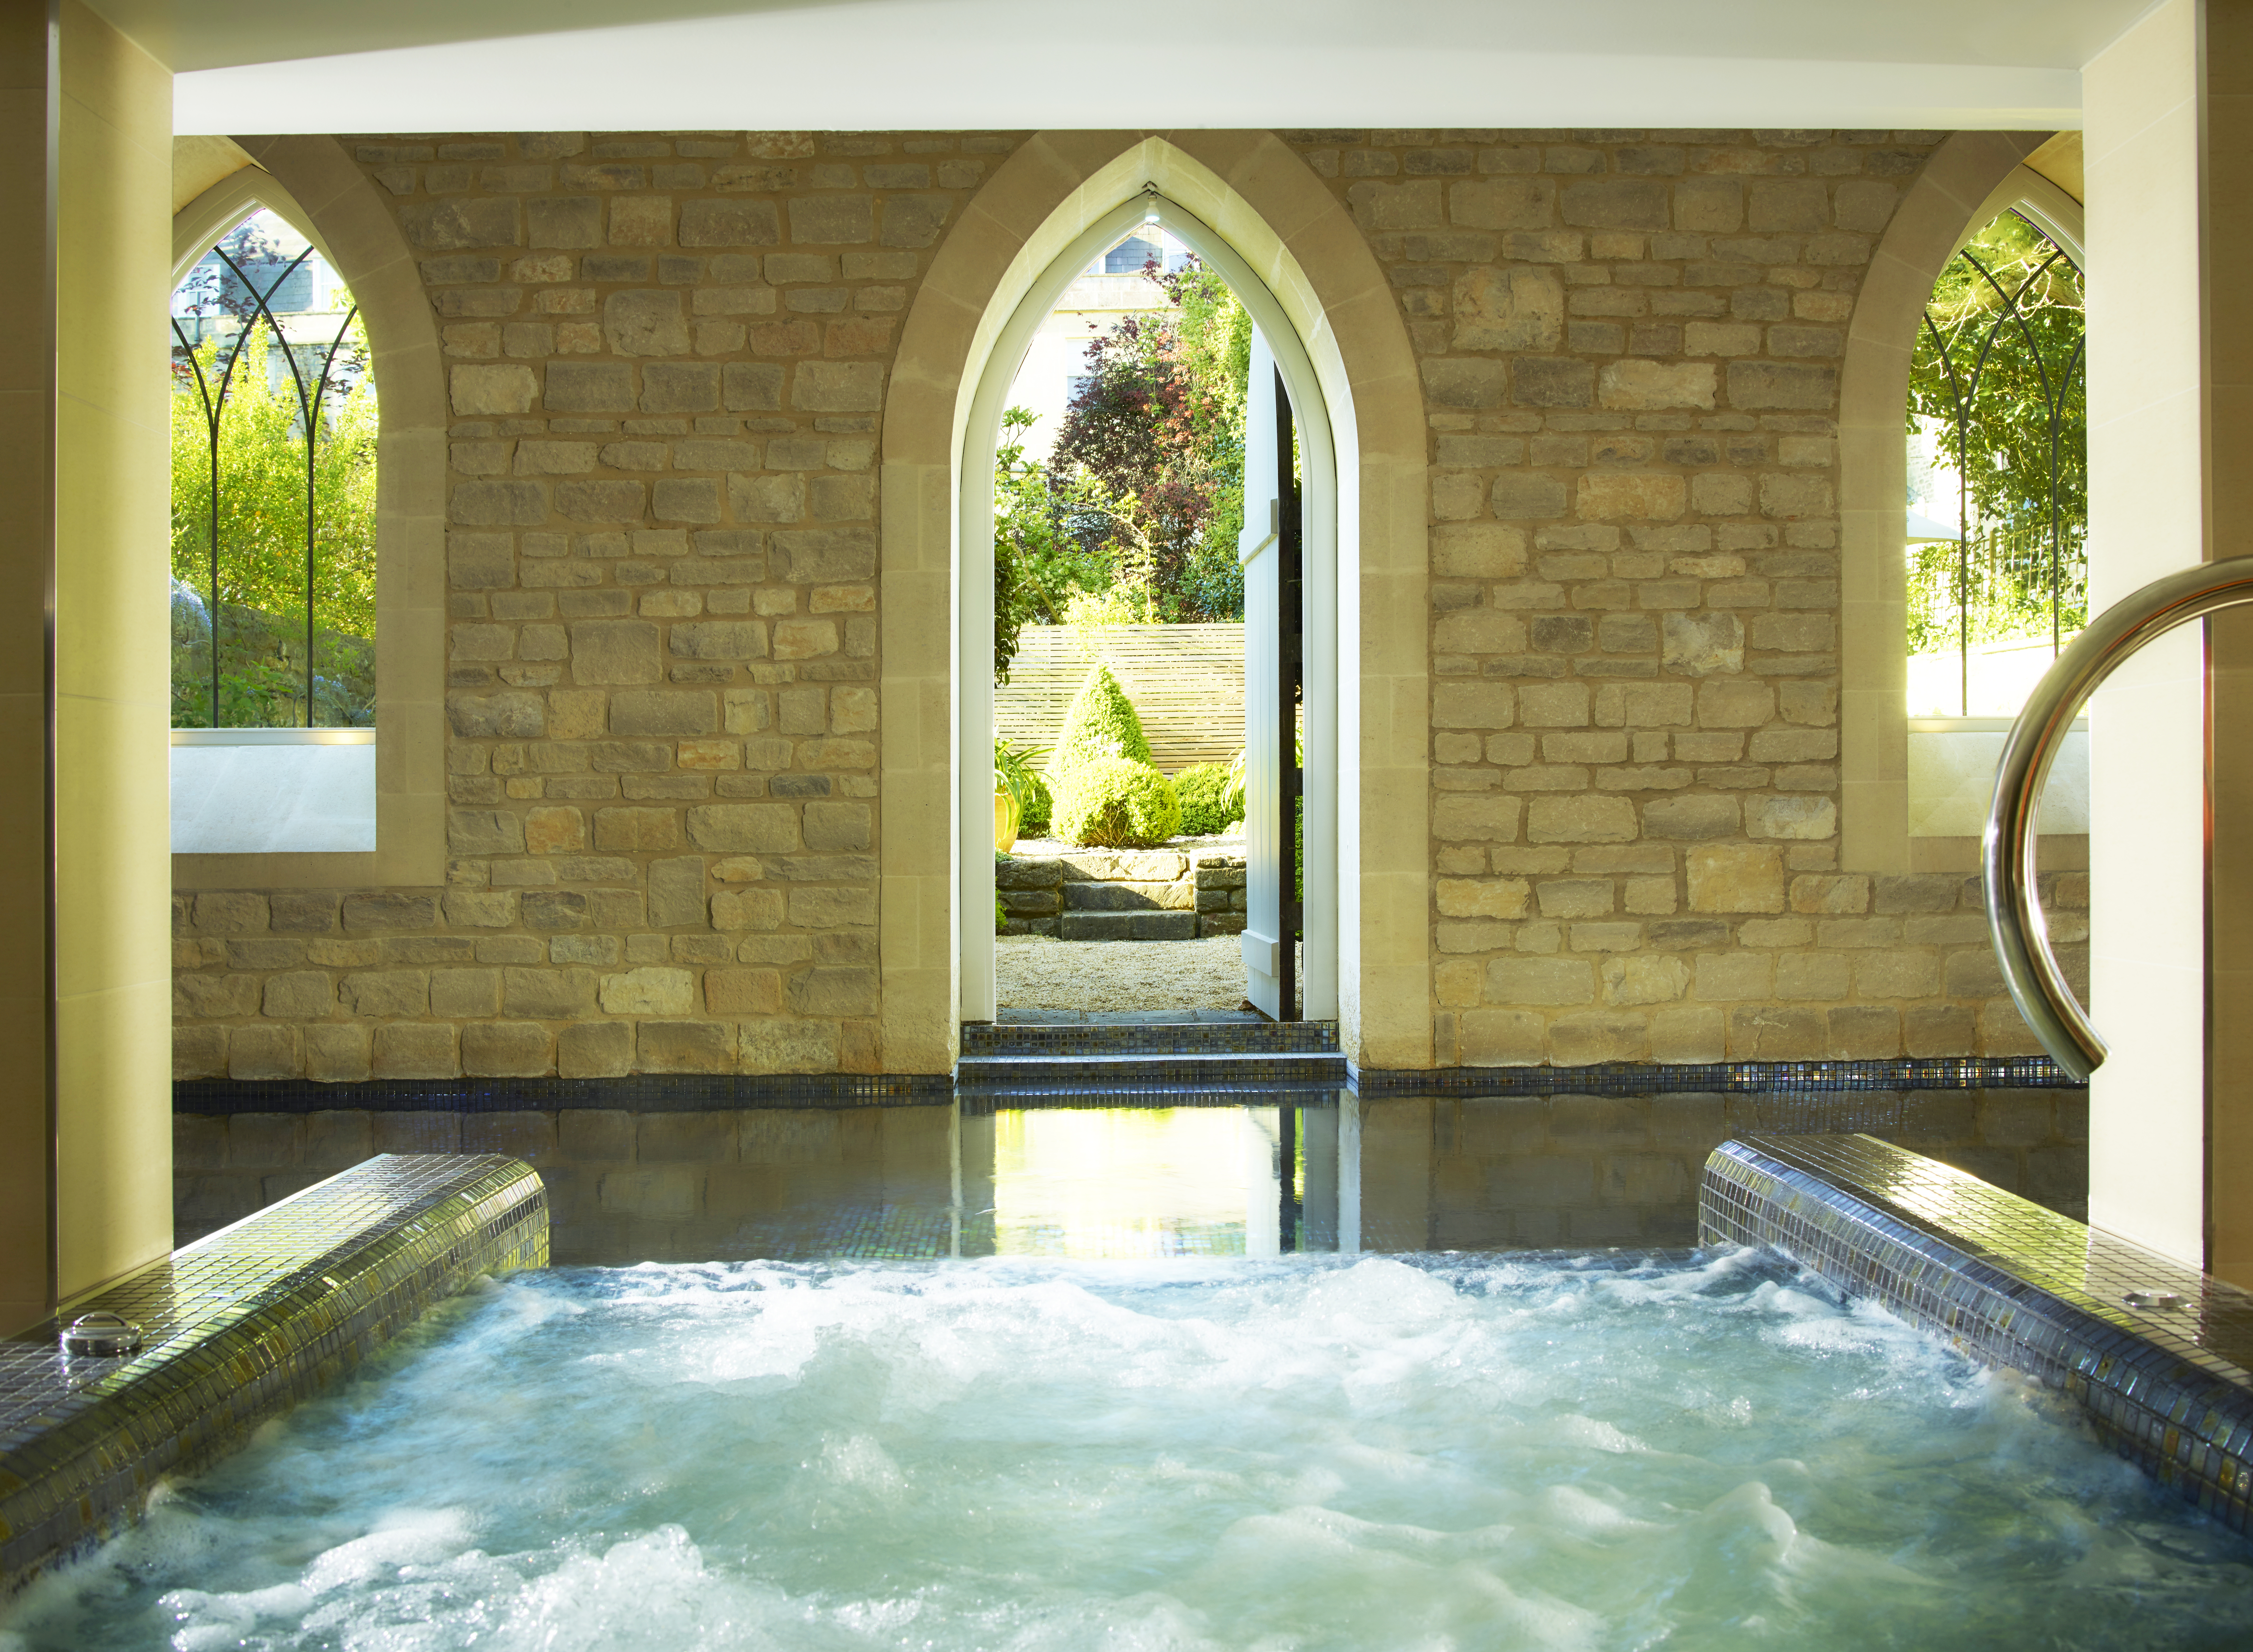 The Serene Day Retreat , The Royal Crescent Hotel And Spa